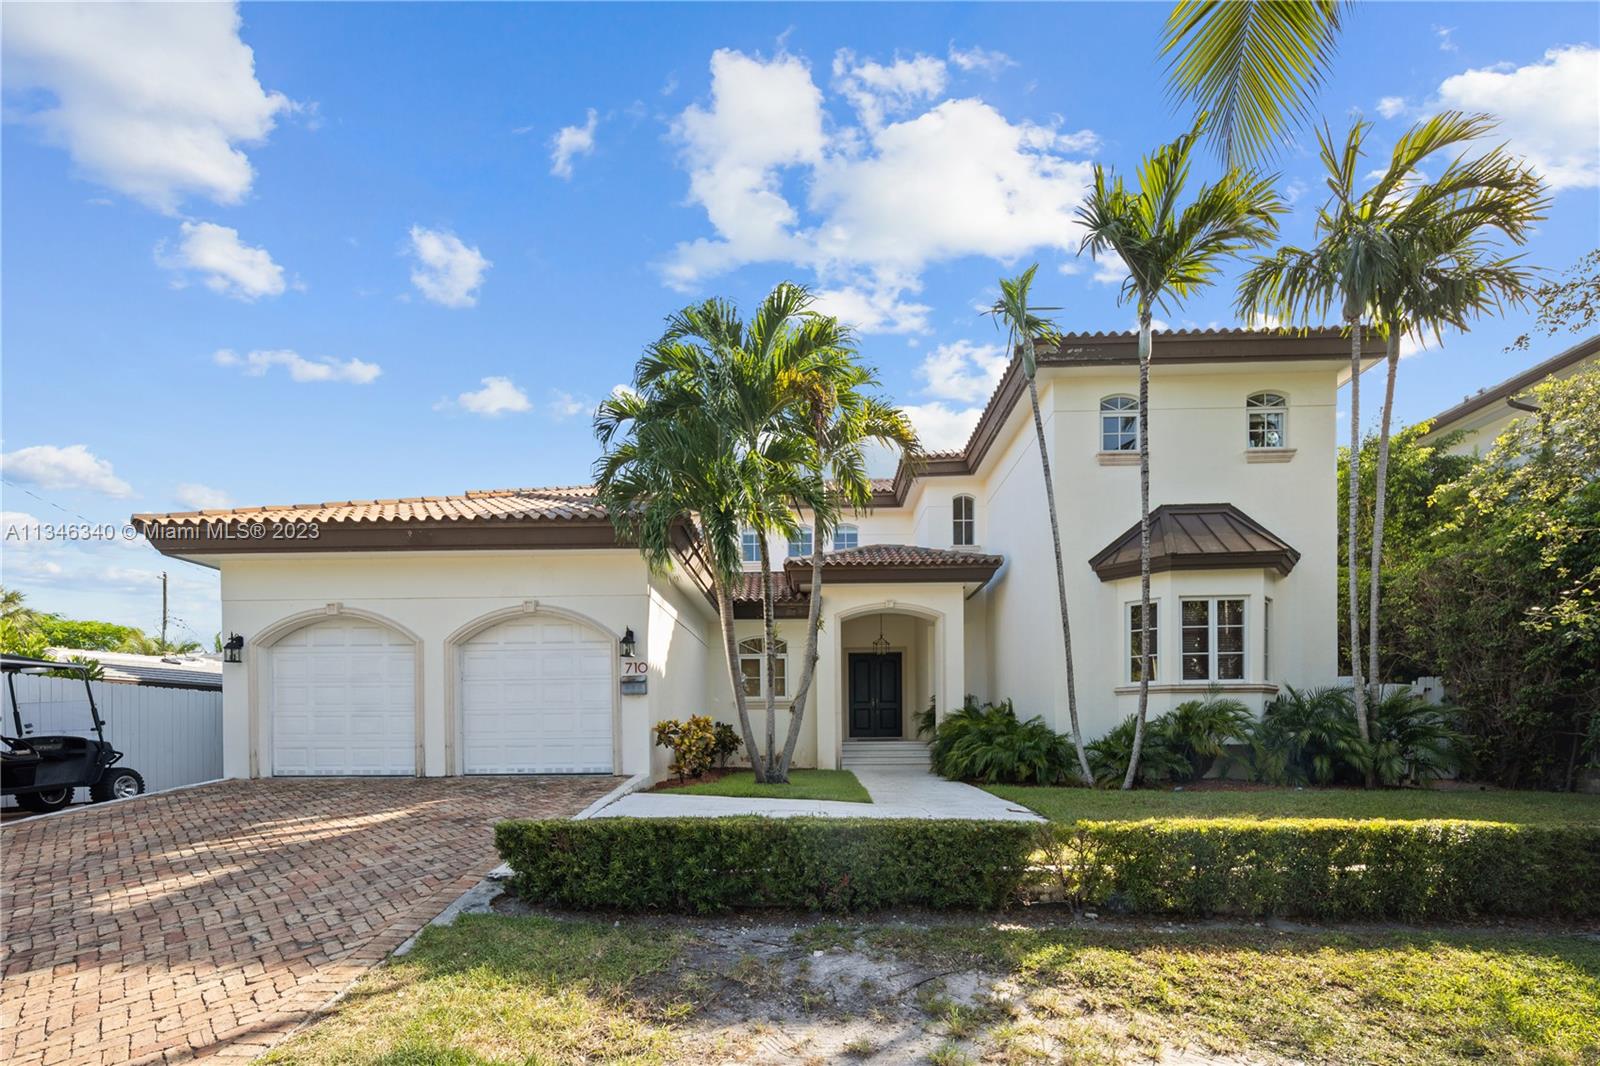 Spacious 6 Bedrooms/6.5 Bathrooms quiet street in Island Paradise, Key Biscayne with a 7,620 Sq.Ft Lot of Land and Pool! Ready to Move in!